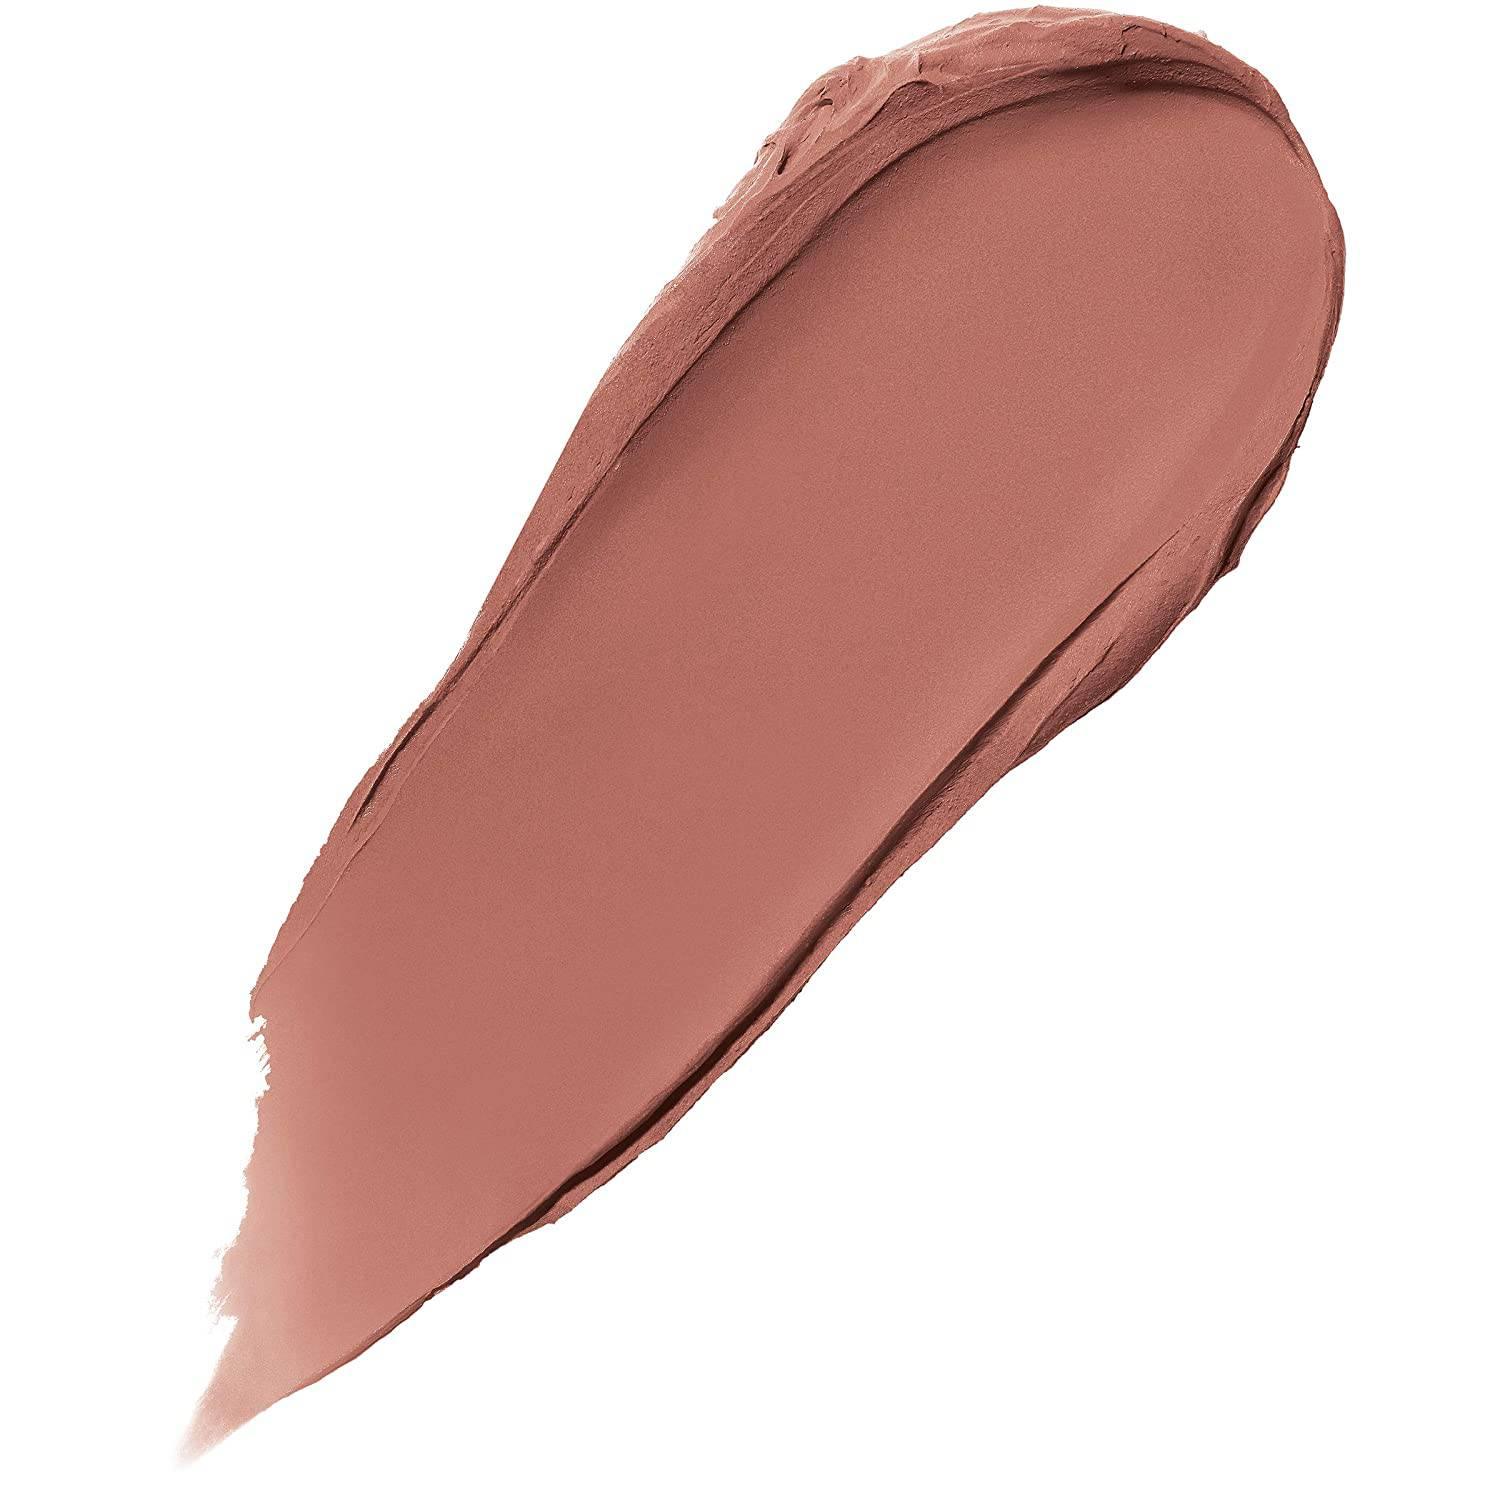 L'Oreal Paris Cosmetics Colour Riche Ultra Matte Highly Pigmented Nude Lipstick, All Out Pout, 0.13 Ounce All Out Pout 0.13 Ounce (Pack of 1) - African Beauty Online